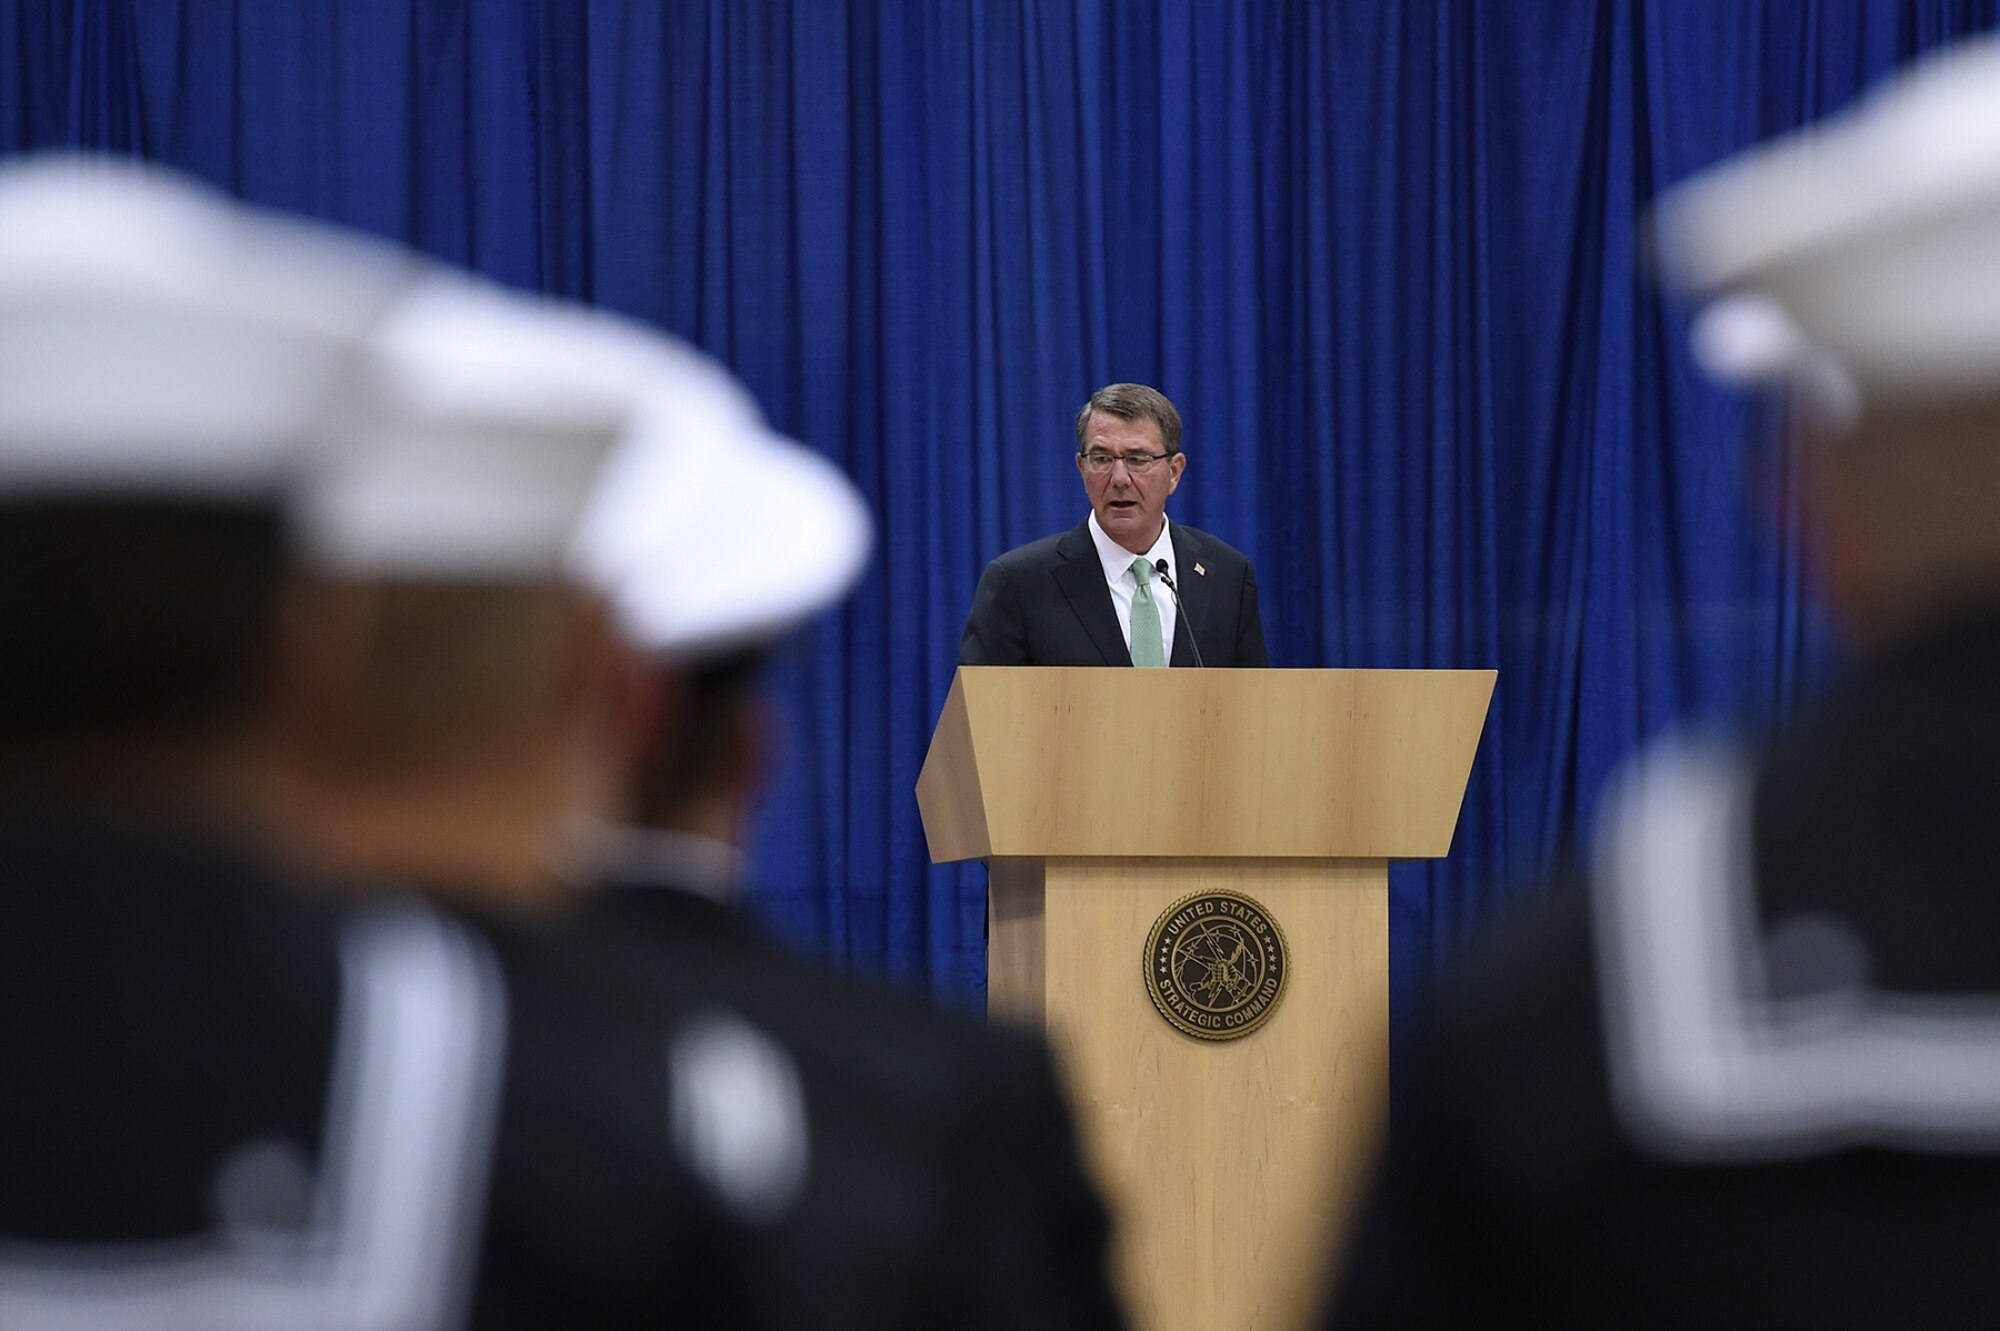 Secretary of Defense Ash Carter provides remarks during the U.S. Strategic Command (USSTRATCOM) change of command ceremony at Offutt Air Force Base, Neb., Nov. 3, 2016. Carter, who presided over the change of command, congratulated Gen. John E. Hyten on his appointment as the new USSTRATCOM commander. He also thanked Adm. Cecil D. Haney, outgoing USSTRATCOM commander, for his service. Additionally, Chairman of the Joint Chiefs of Staff Gen. Joseph F. Dunford provided remarks during the ceremony and presented the Joint Meritorious Unit Award to USSTRATCOM. Hyten previously served as commander of Air Force Space Command, and Haney will retire from active military duty during a separate ceremony in January. One of nine DoD unified combatant commands, USSTRATCOM has global strategic missions assigned through the Unified Command Plan that include strategic deterrence; space operations; cyberspace operations; joint electronic warfare; global strike; missile defense; intelligence, surveillance and reconnaissance; combating weapons of mass destruction; and analysis and targeting. (U.S. Air Force photo by Staff Sgt. Jonathan Lovelady)